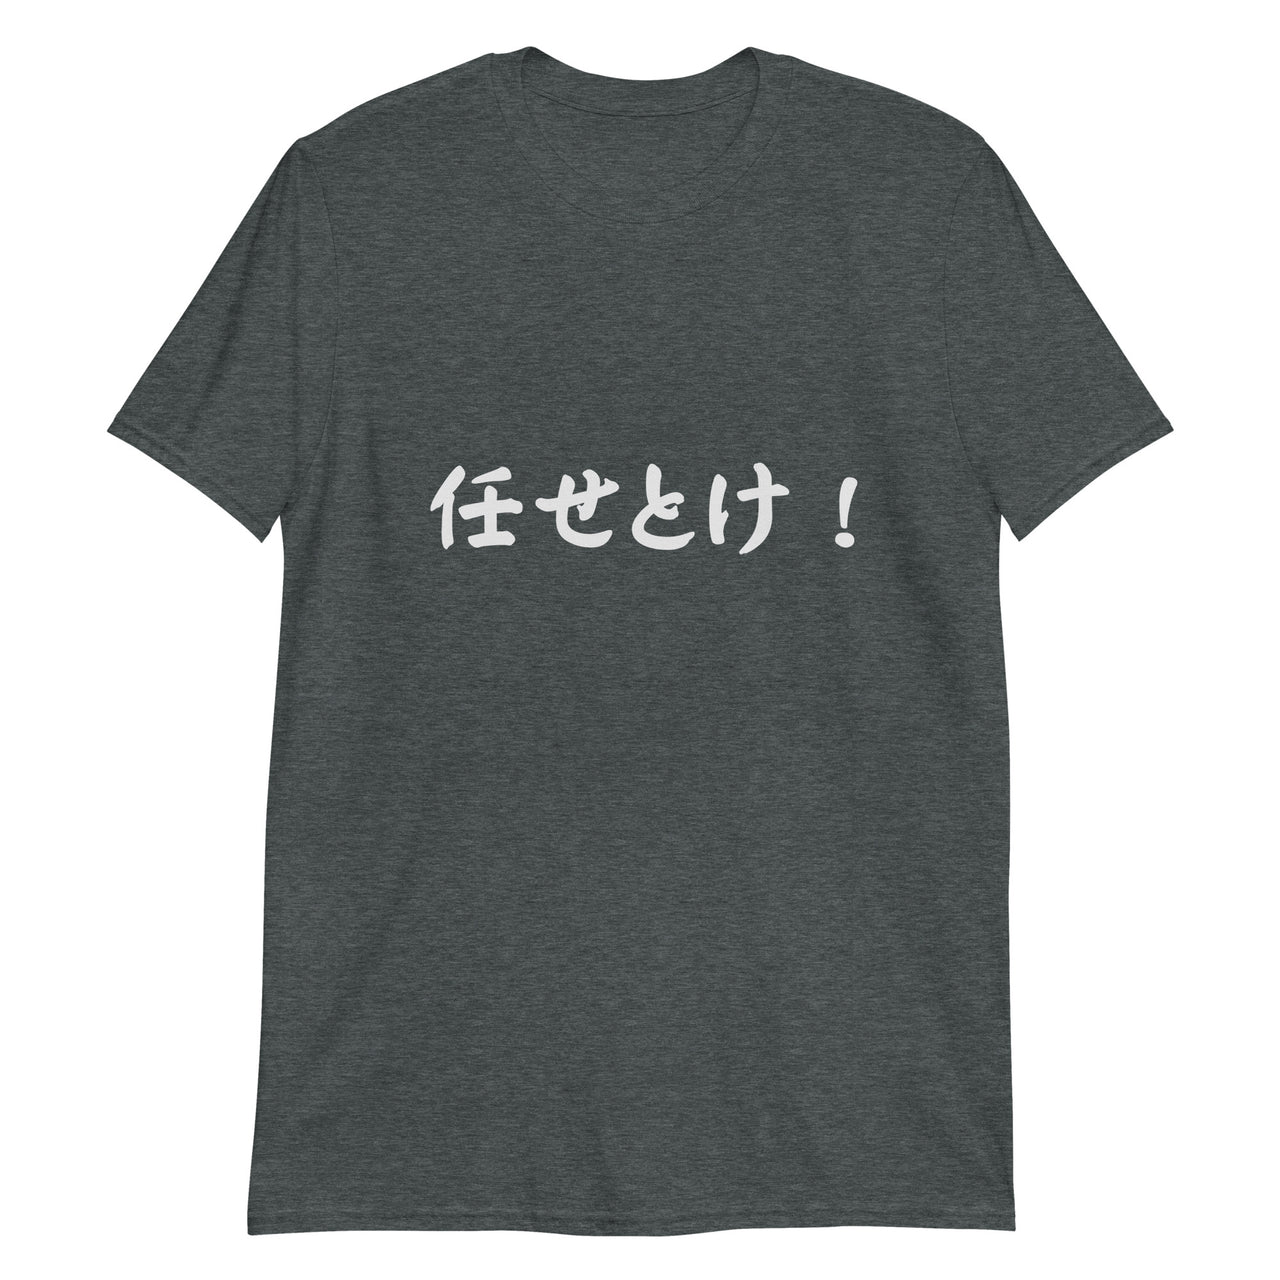 Leave it to Me in Japanese T-Shirt